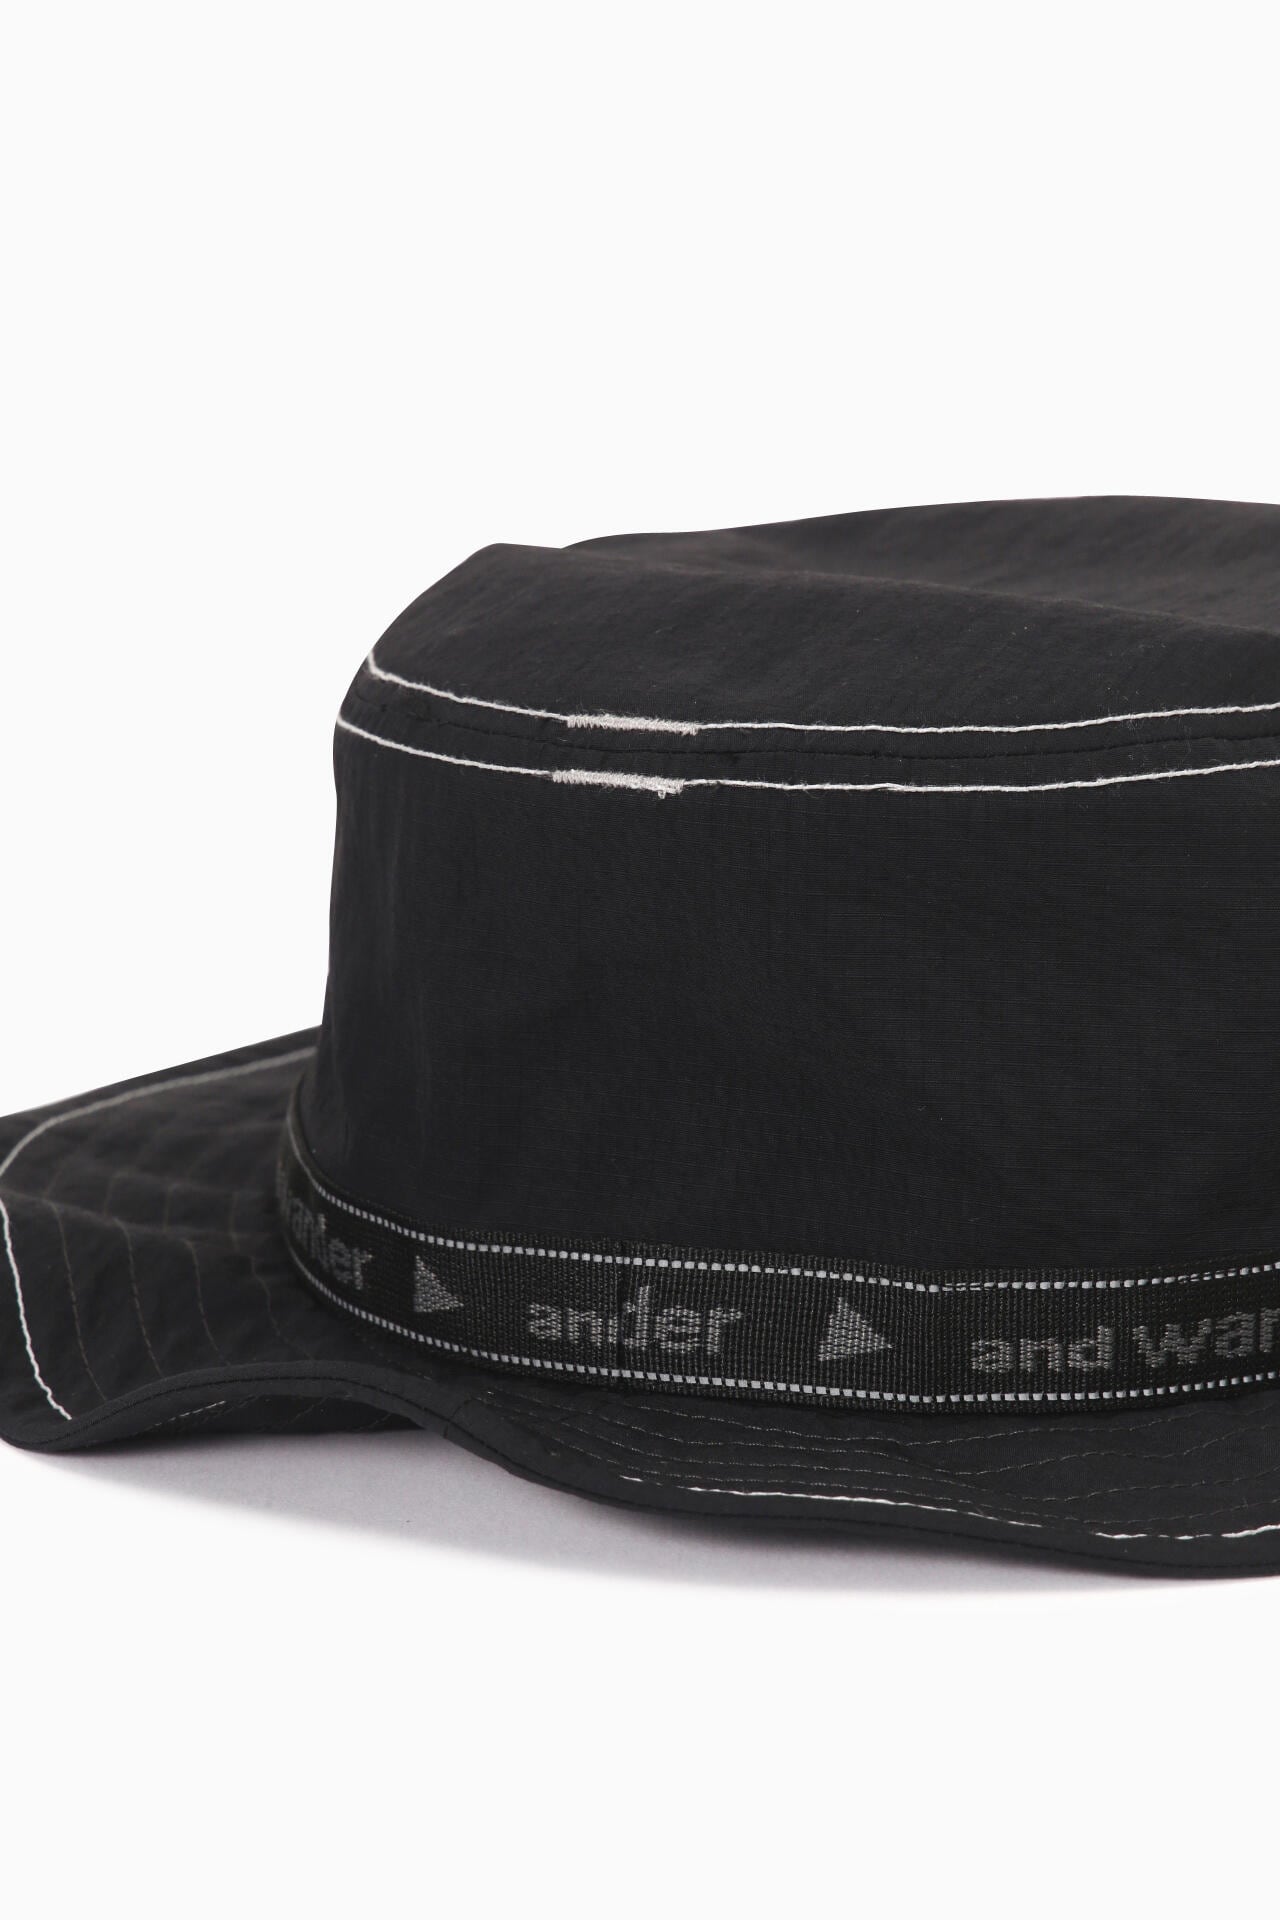 JQ tape hat | hats_caps | and wander ONLINE STORE